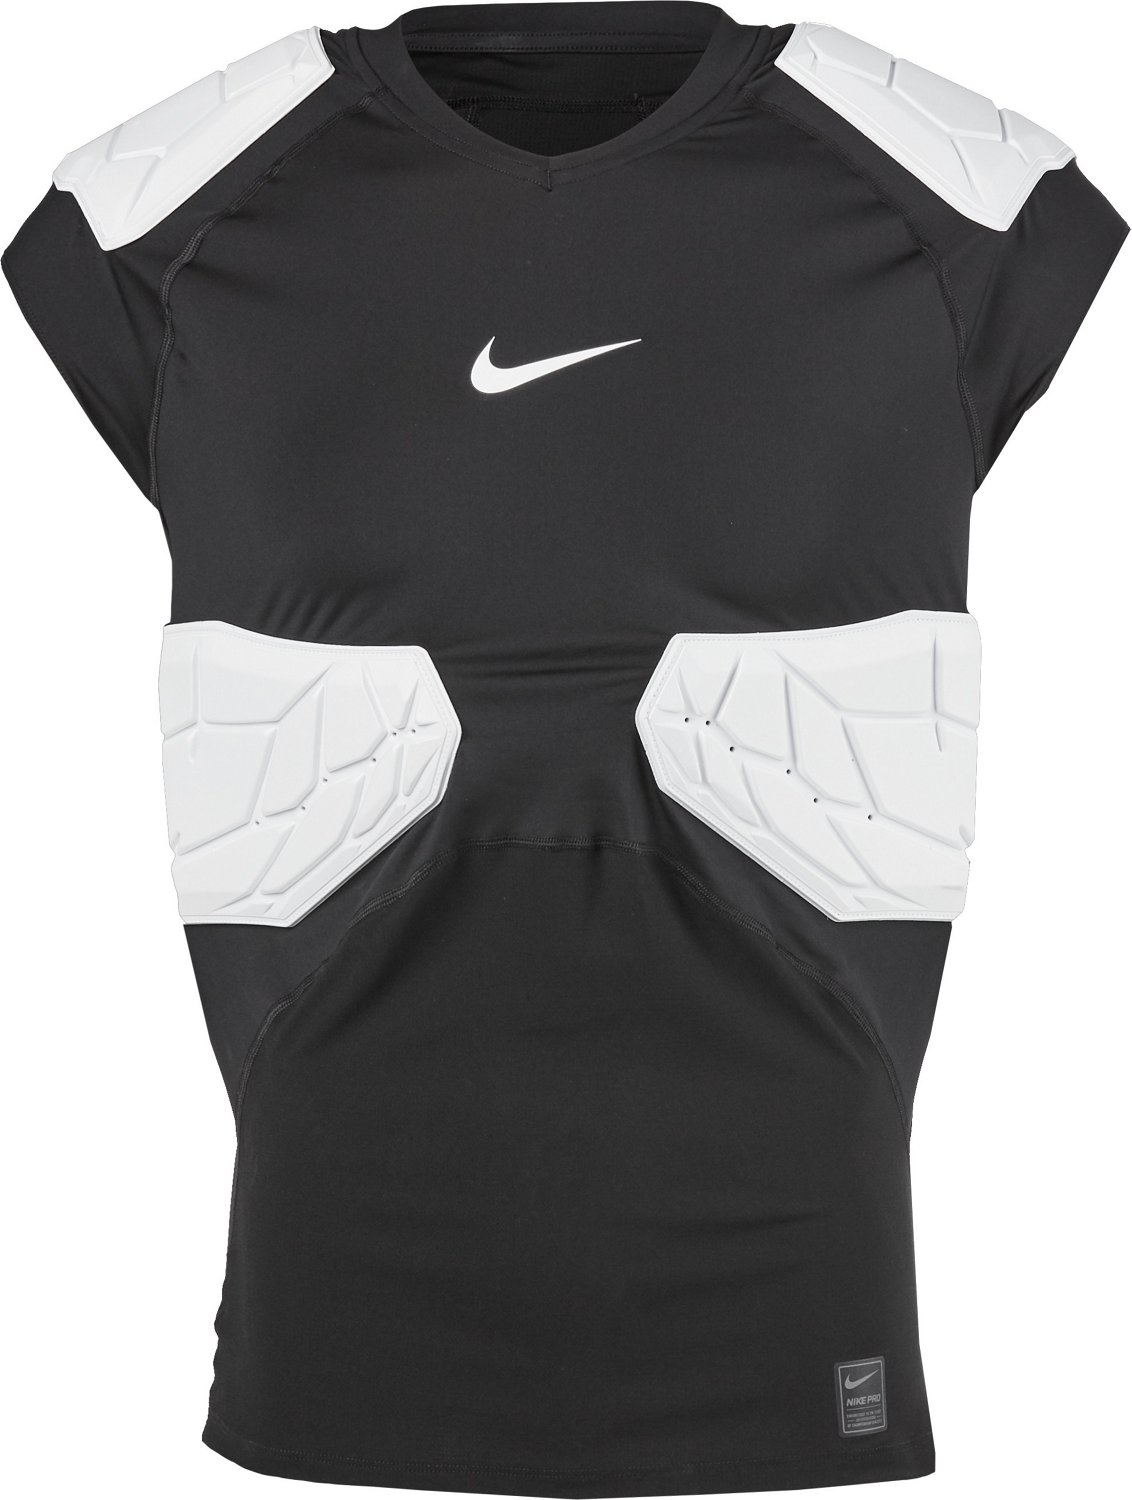 Nike Hyperstrong 4 Pad Football Top | Academy